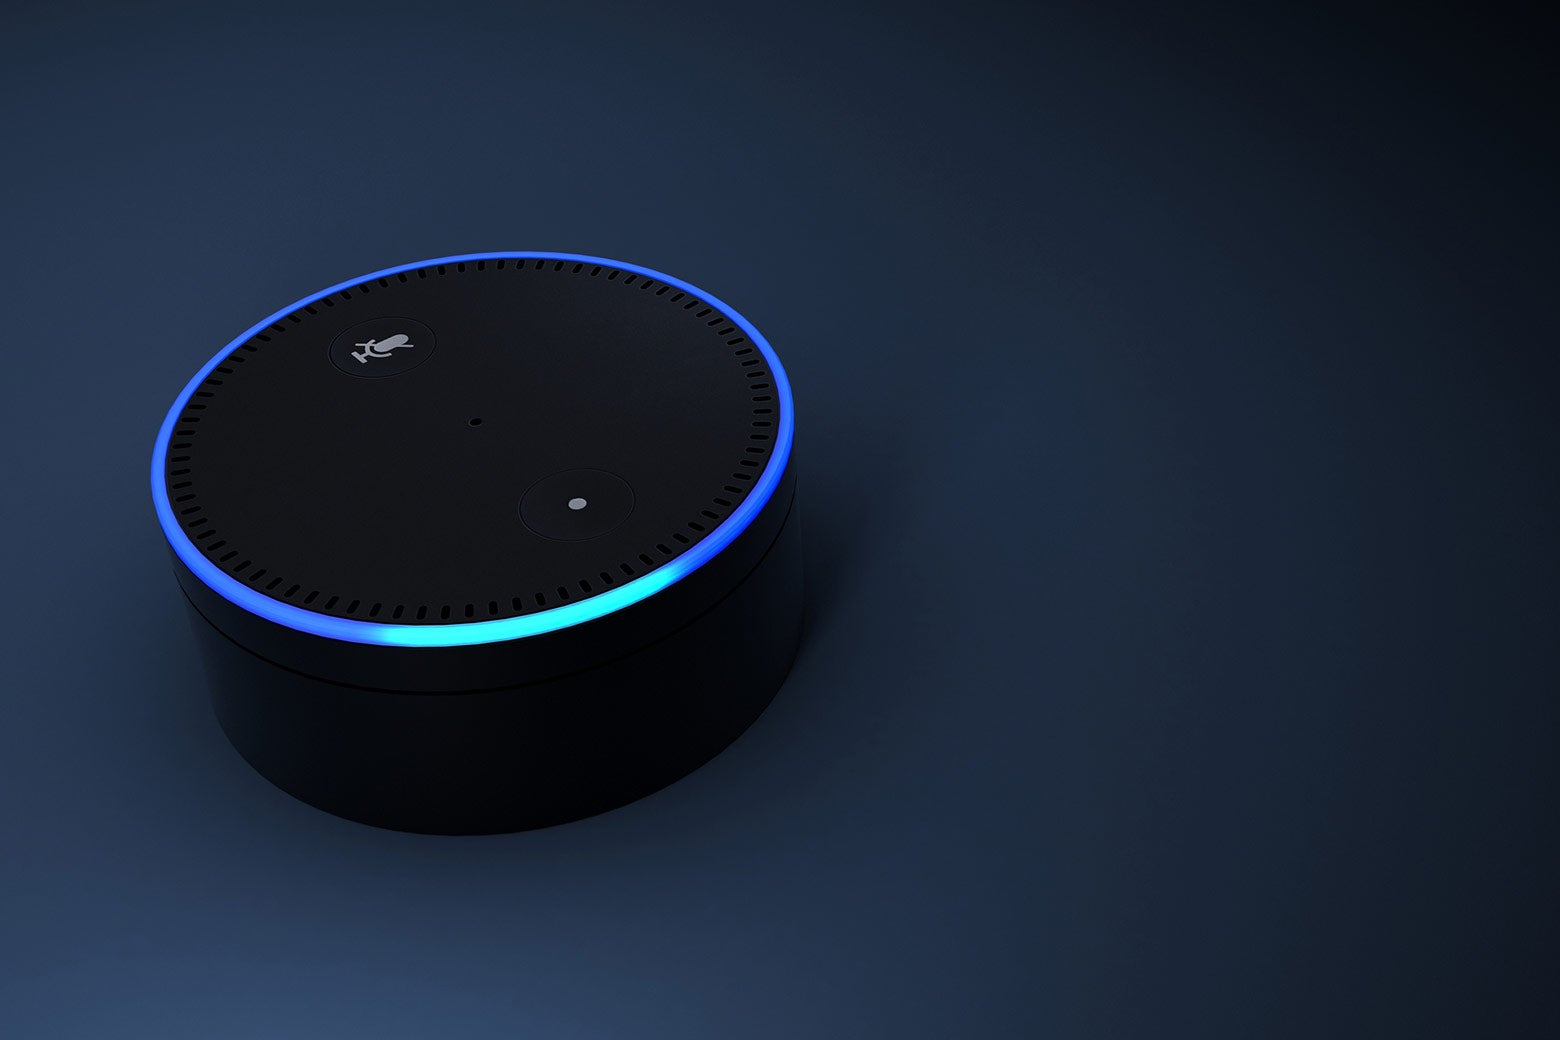 An Echo Dot's ring is lit up, indicating that it's listening.